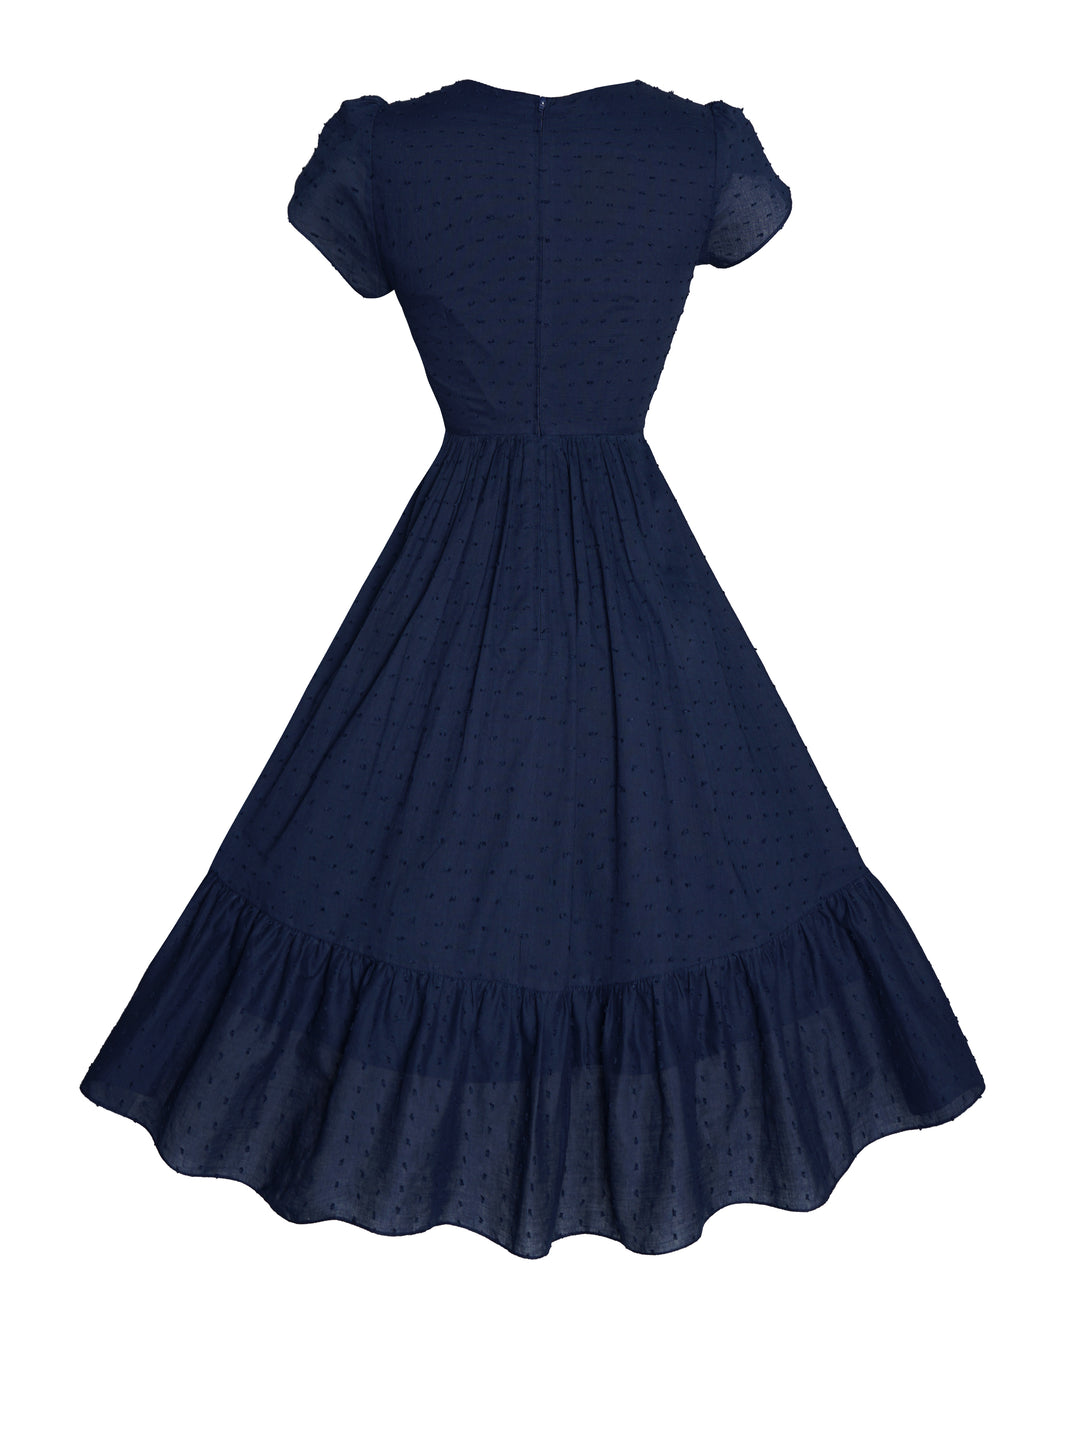 MTO - Ava Dress in Navy Blue "Dotted Swiss"